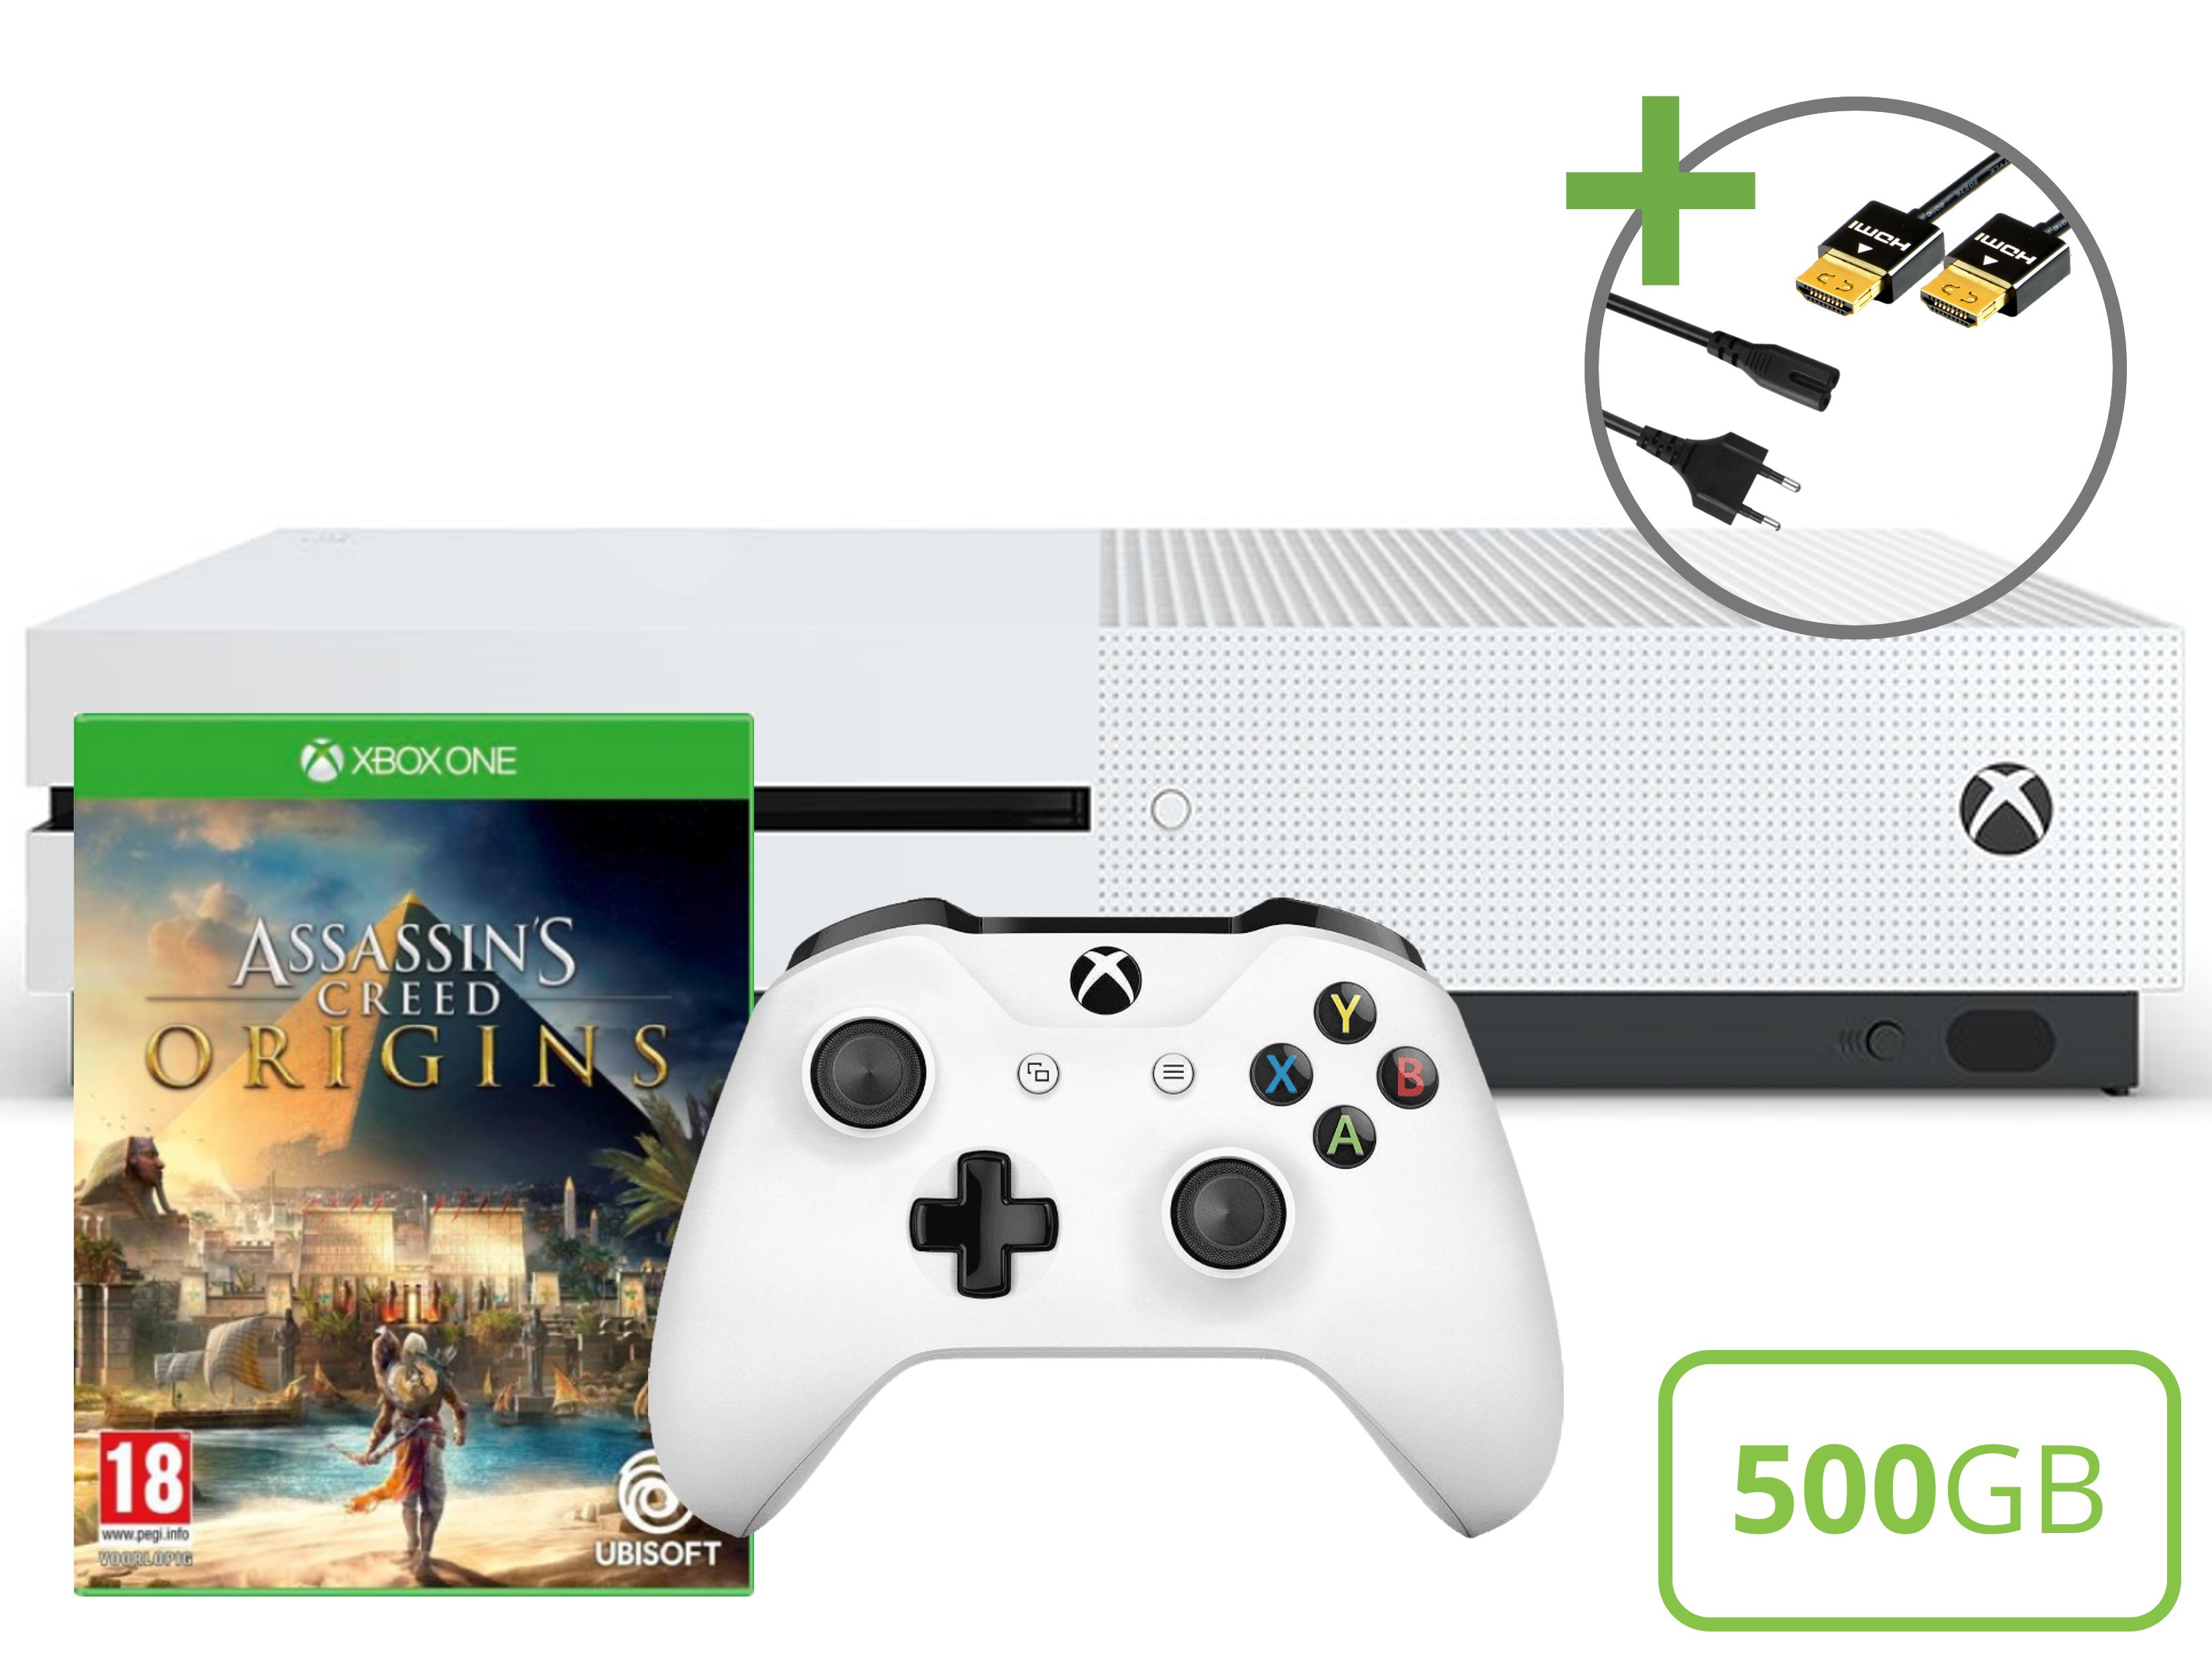 Microsoft Xbox One S Starter Pack - 500GB Assassin's Creed Origins Edition Kopen | Xbox One Hardware